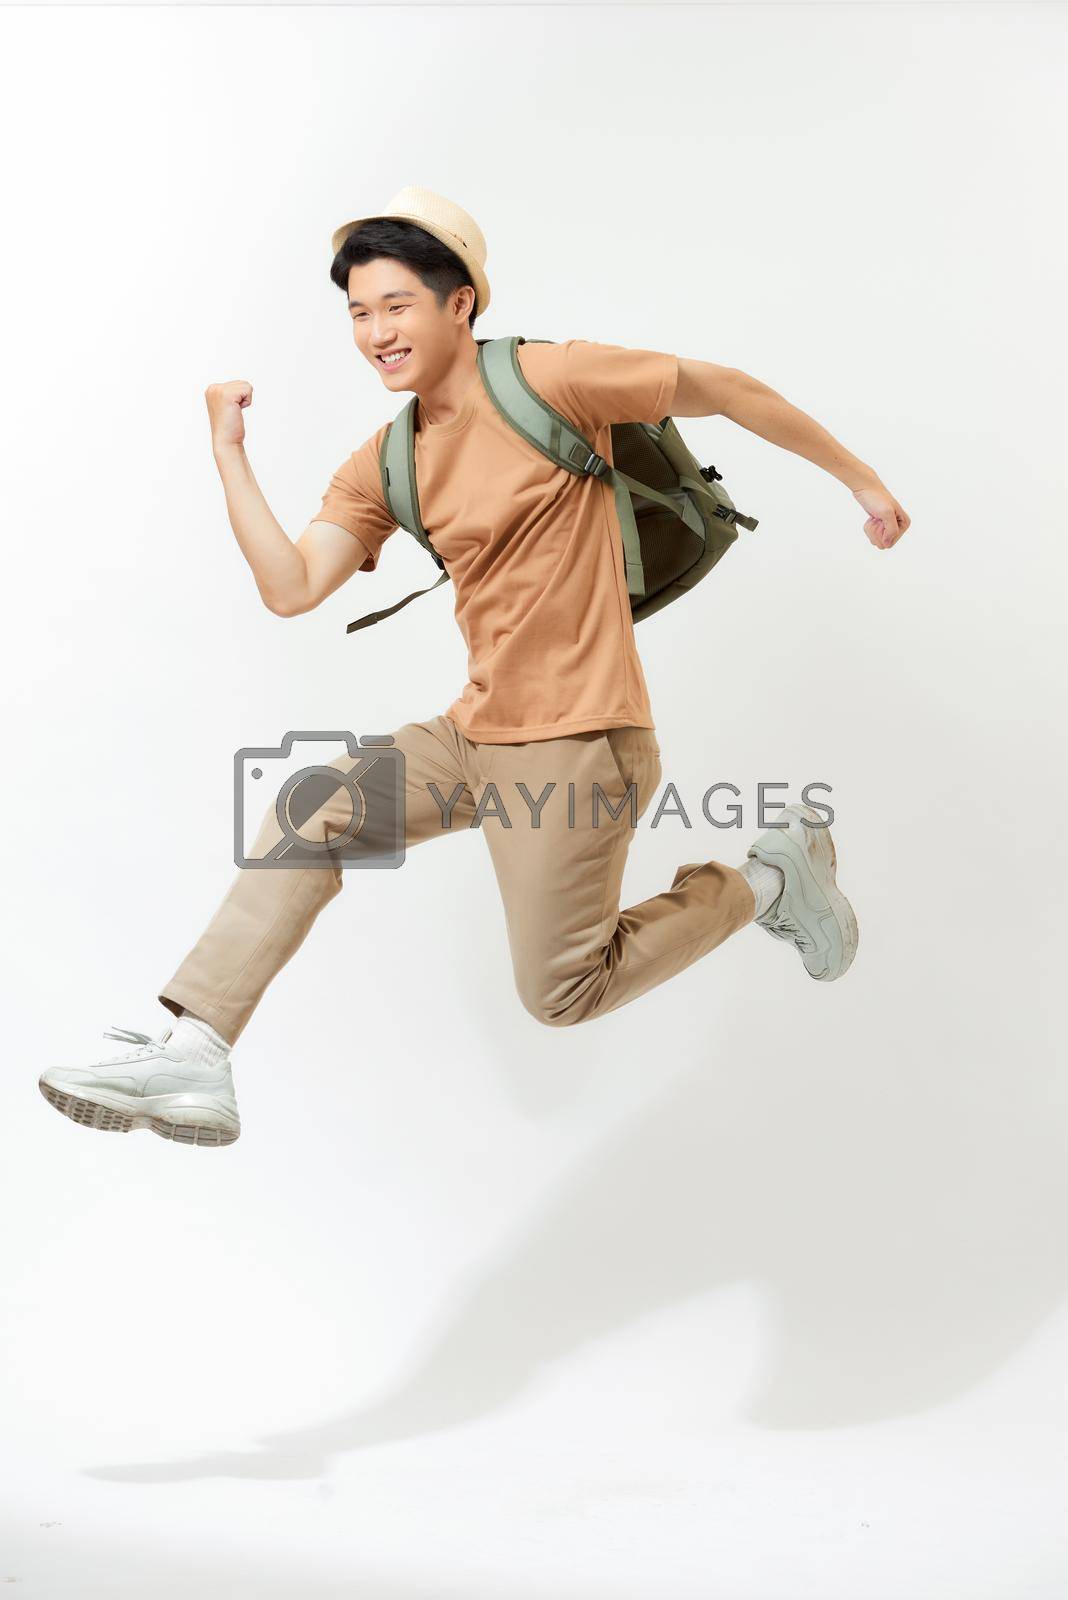 Royalty free image of Side view of excited traveler tourist man on white background by makidotvn